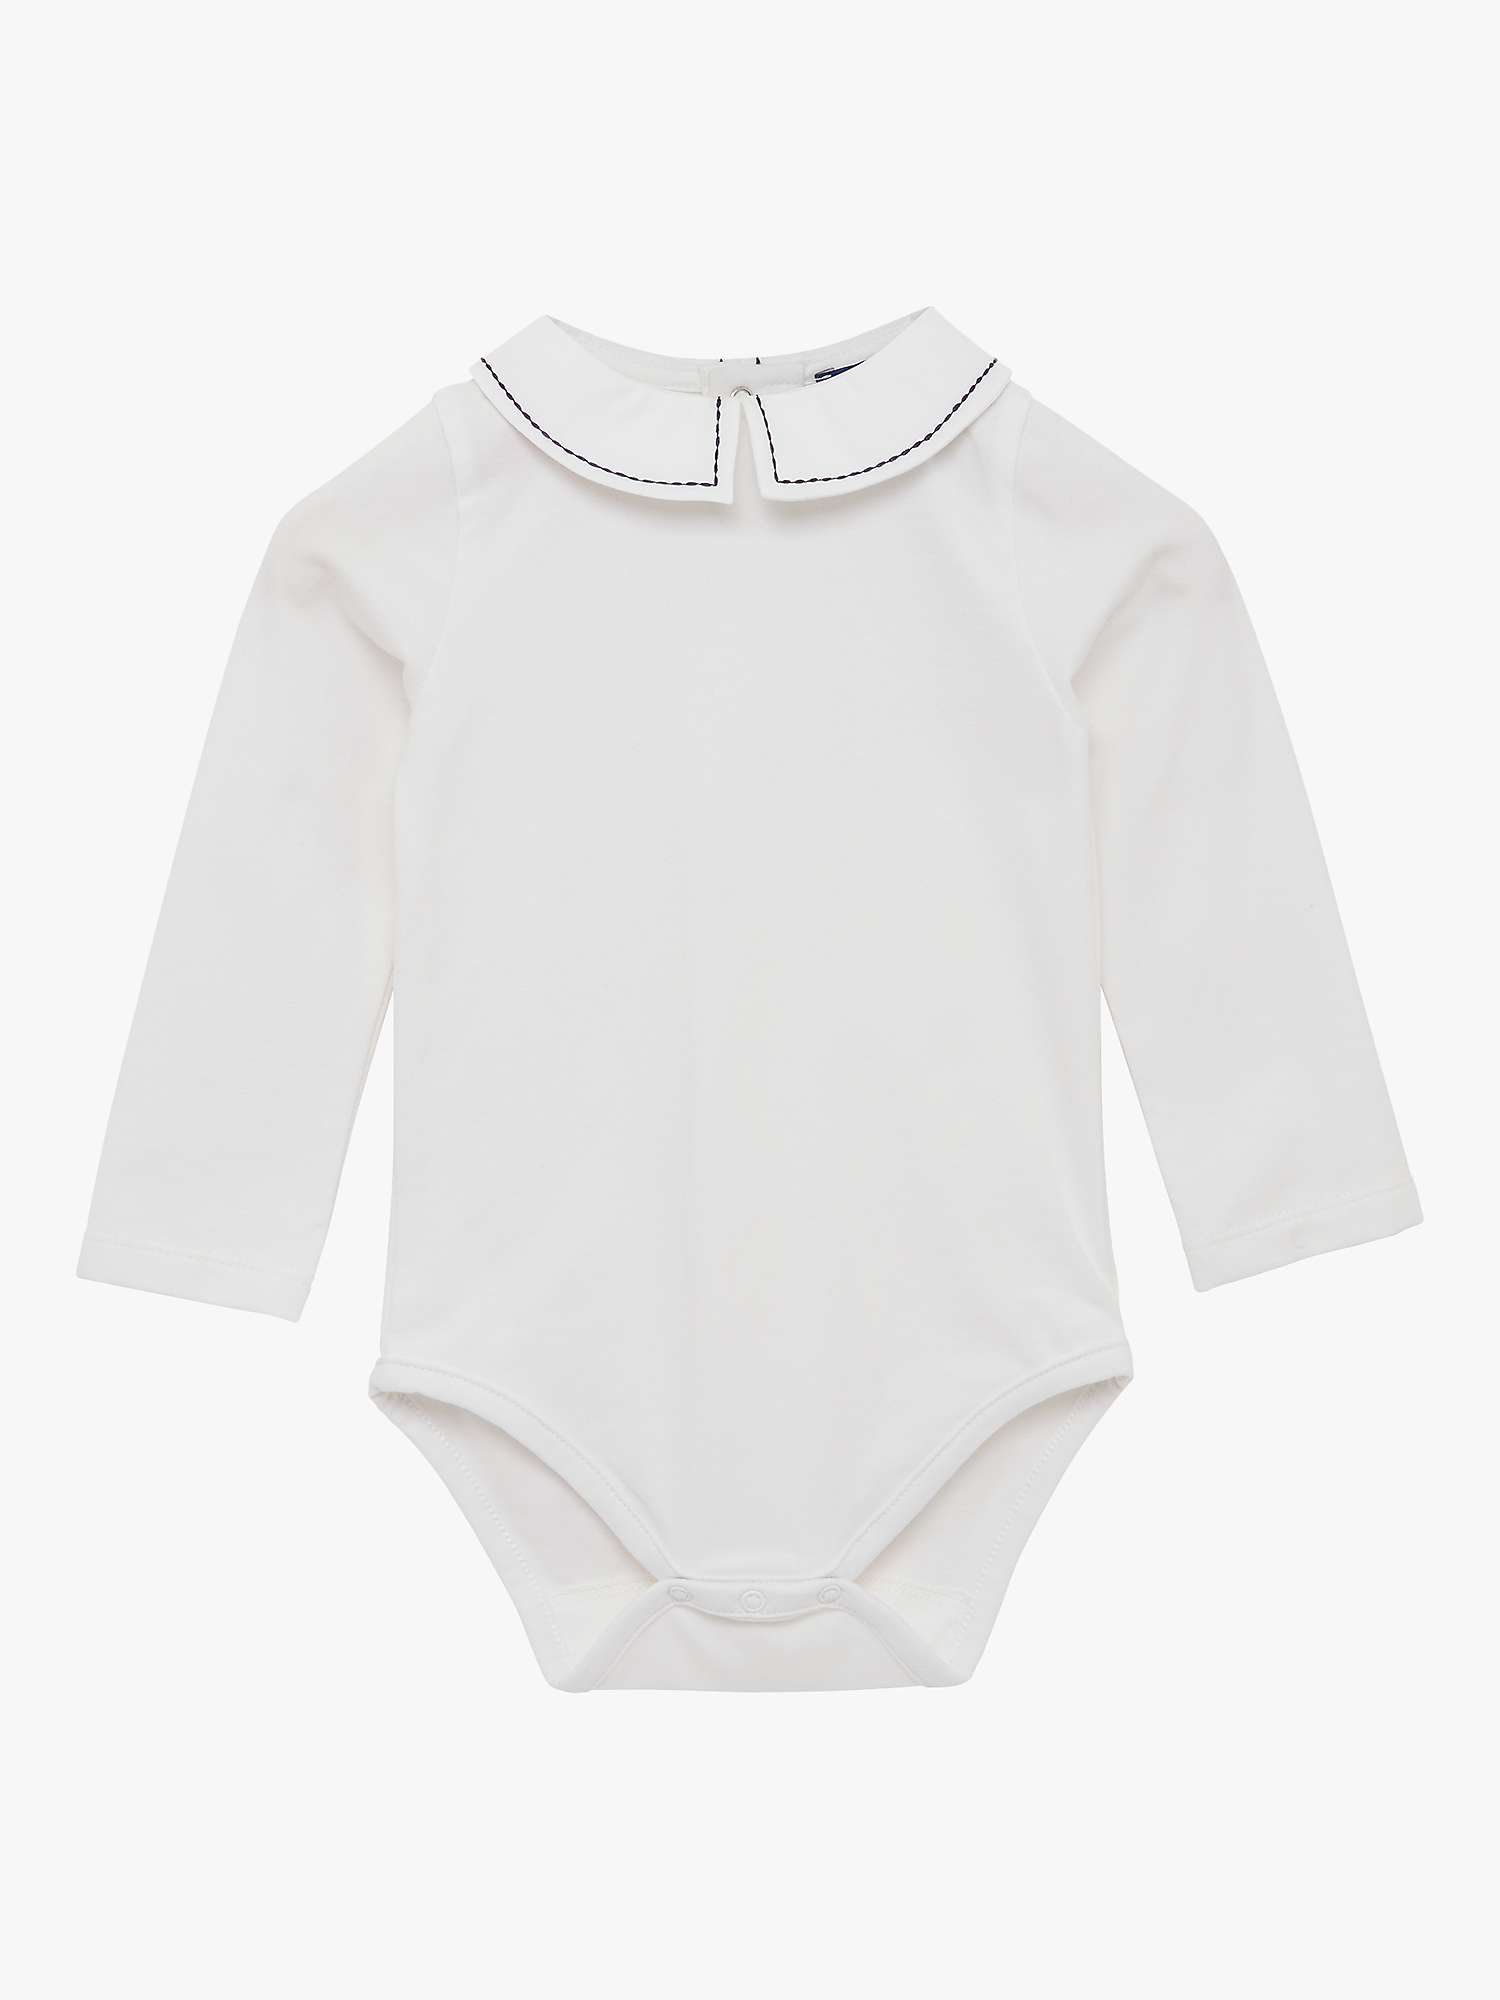 Buy Trotters Baby Monty Stitched Eton Collar Jersey Bodysuit Online at johnlewis.com